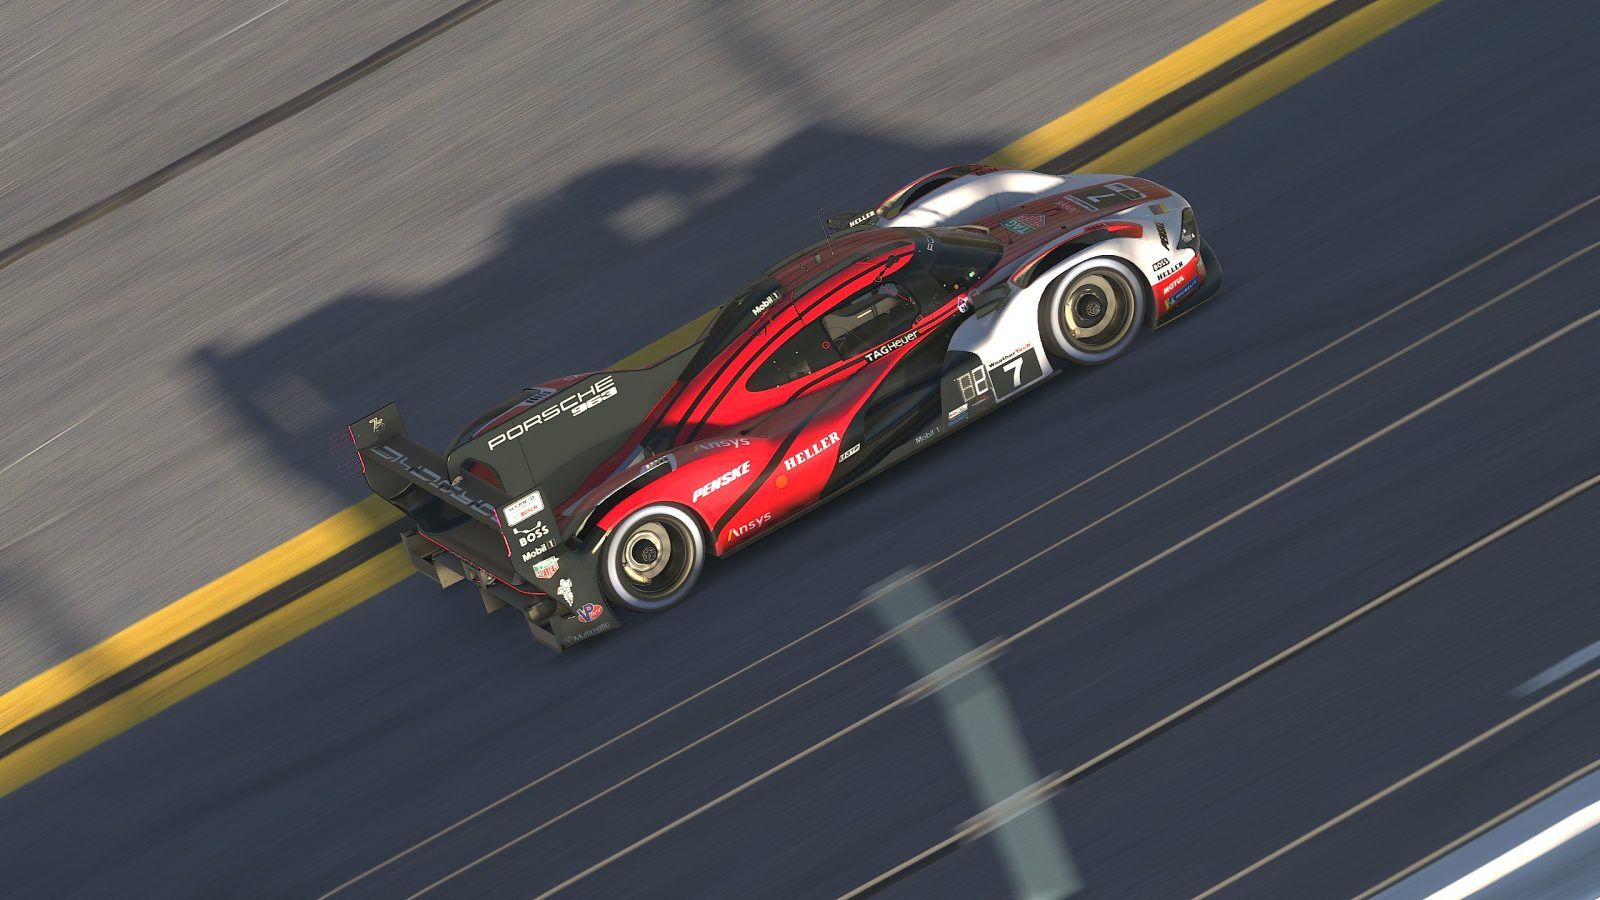 Does iRacing need fewer races?